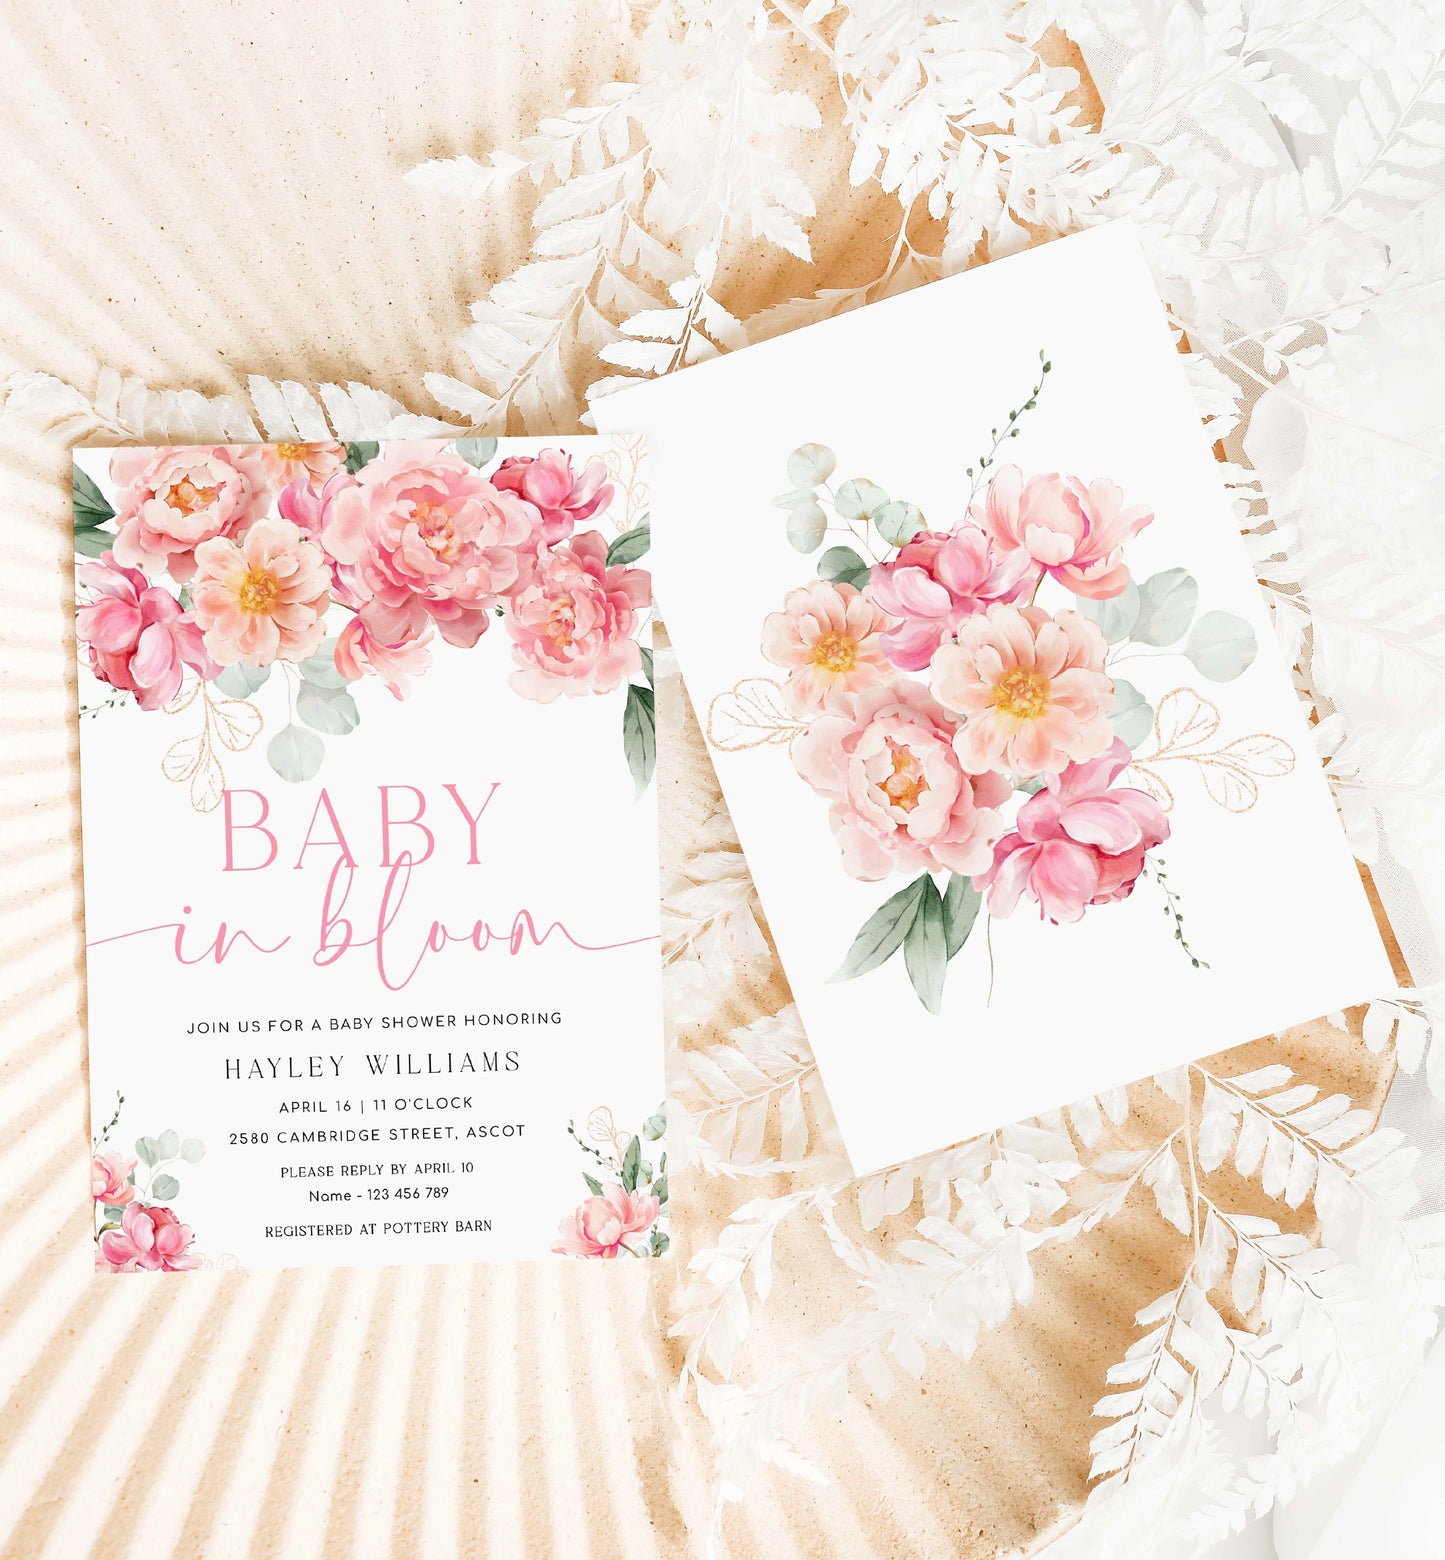 Printable Baby In Bloom Invitation Template, Editable Hot Pink Peony Baby Shower Invitation, Spring Floral Girl Baby Shower Evite, Piper